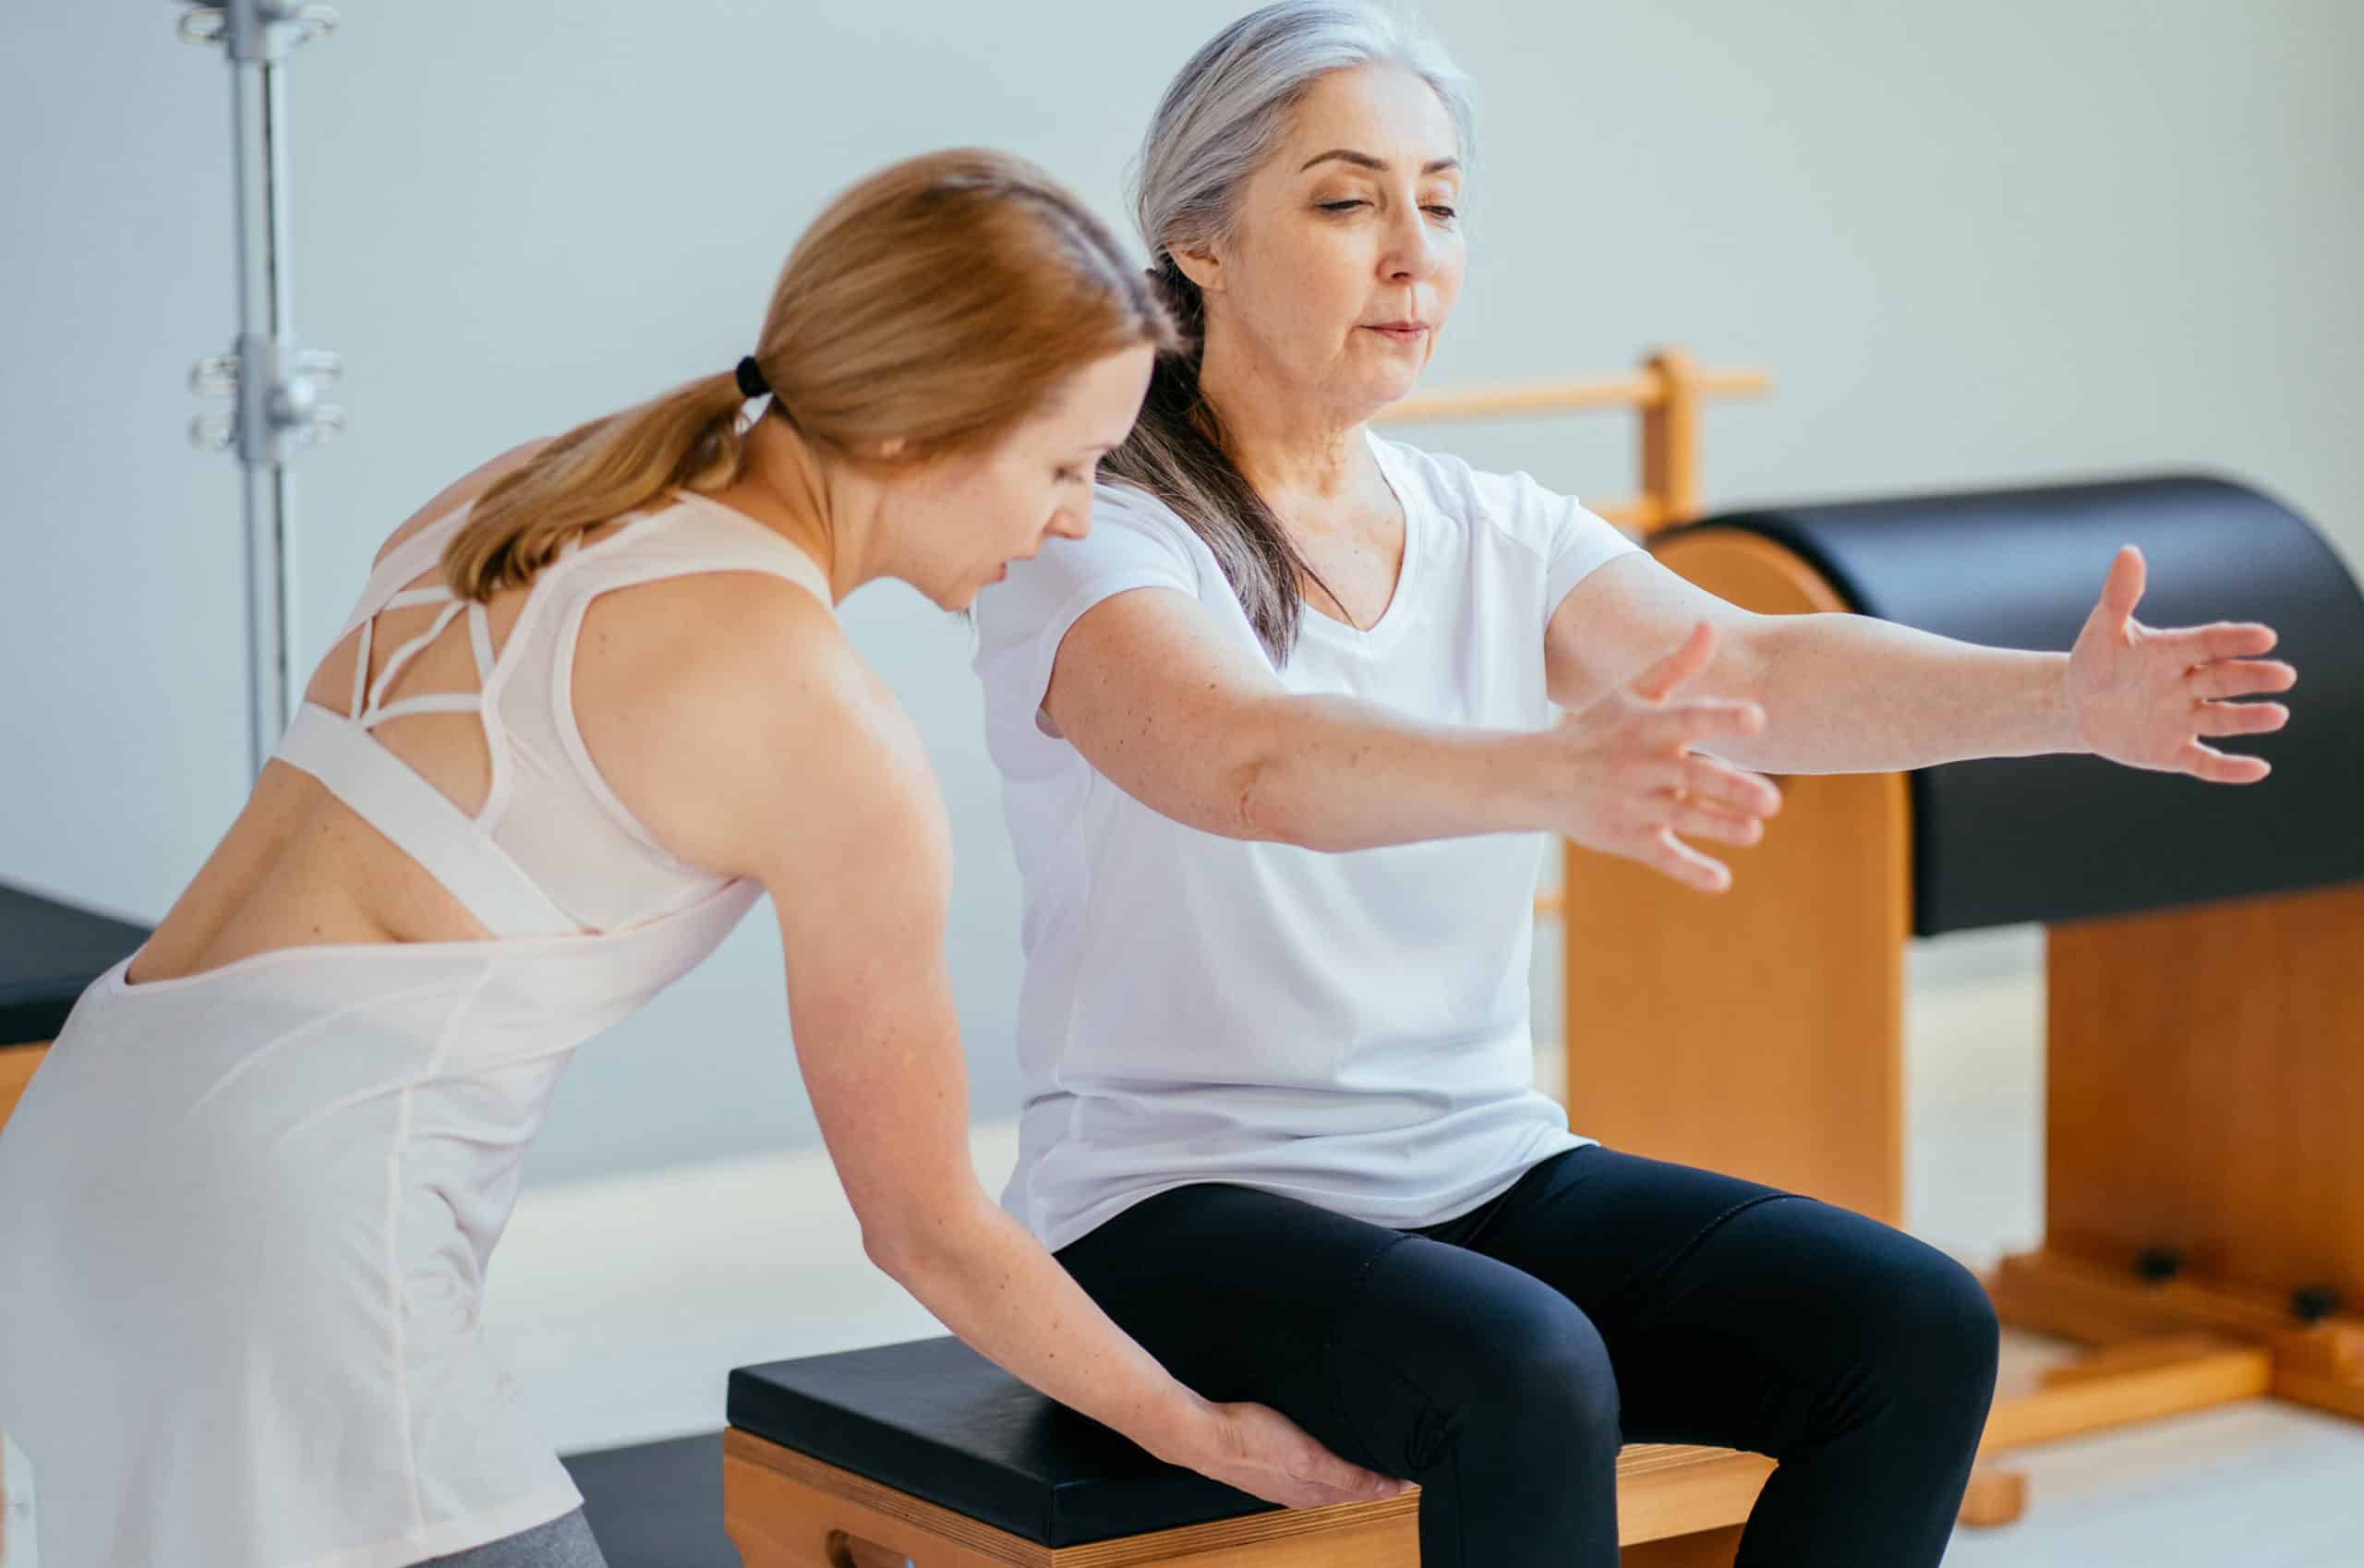 3 Best Yoga Poses For Older Adults, According To Experts – Forbes